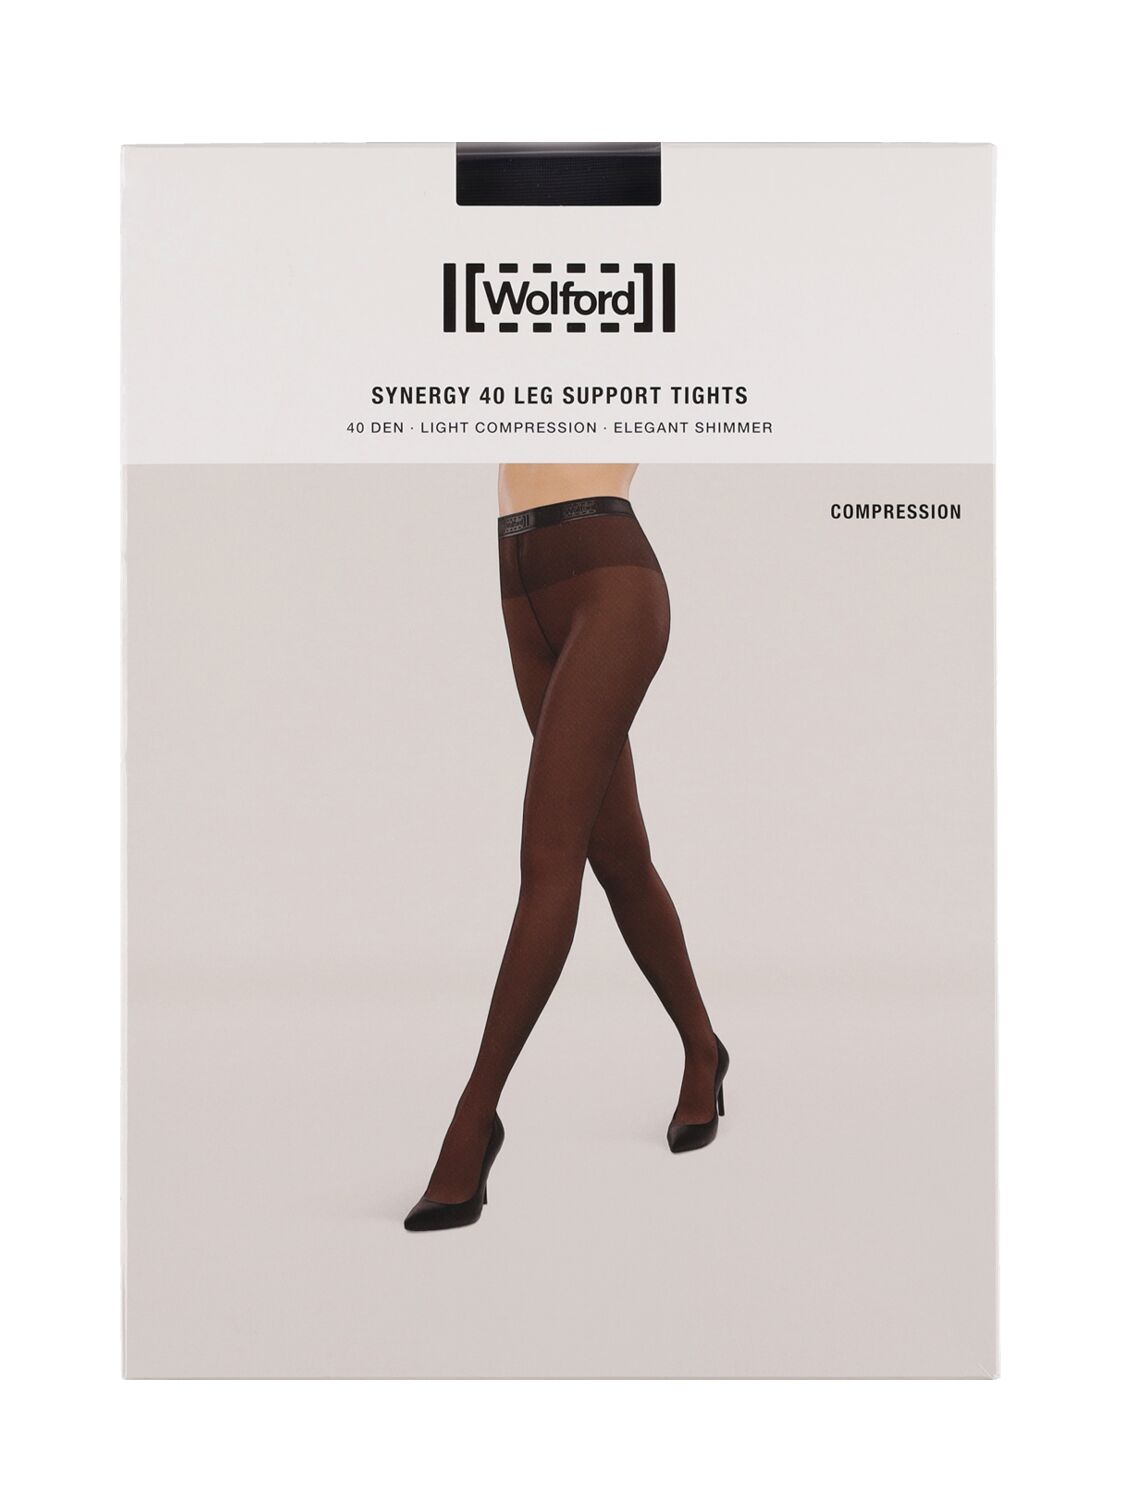 Wolford Synergy 40 Support Tights in Natural